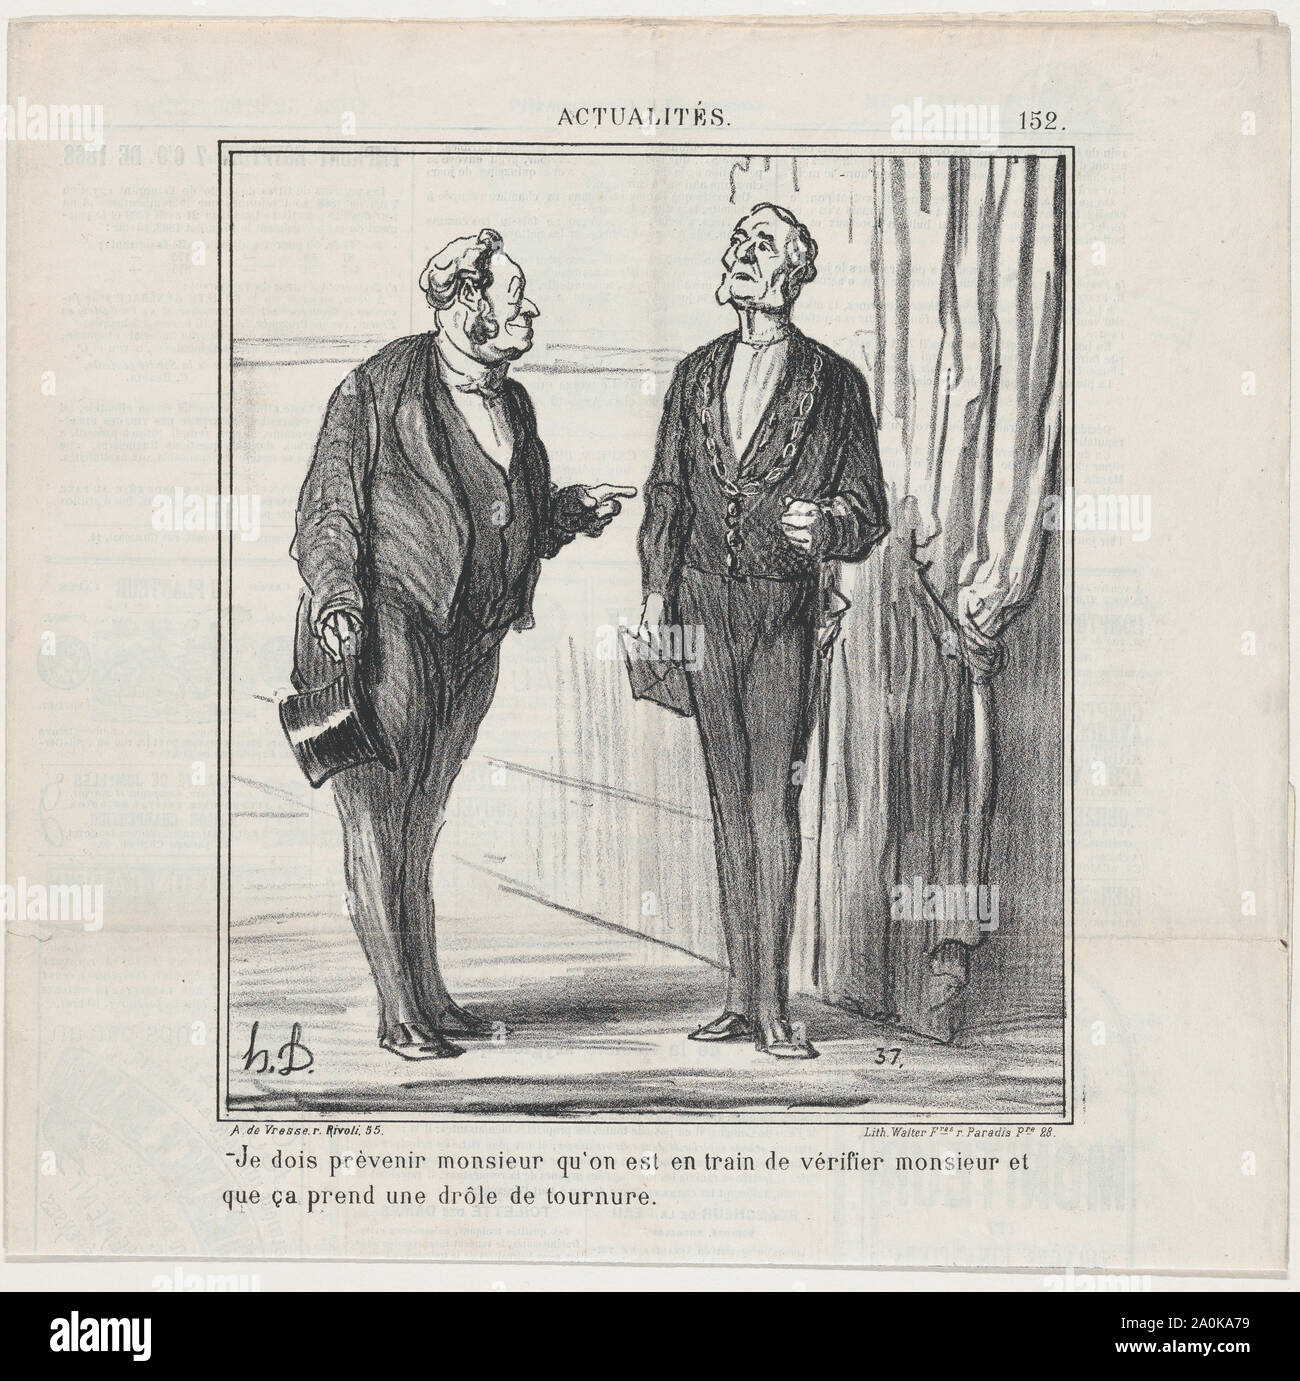 Le Charivari newspaper, July 14, 1869 Monsieur, I am bound to advise you that they are in the process of verifying M.jpg - 2A0KA79 Stock Photo